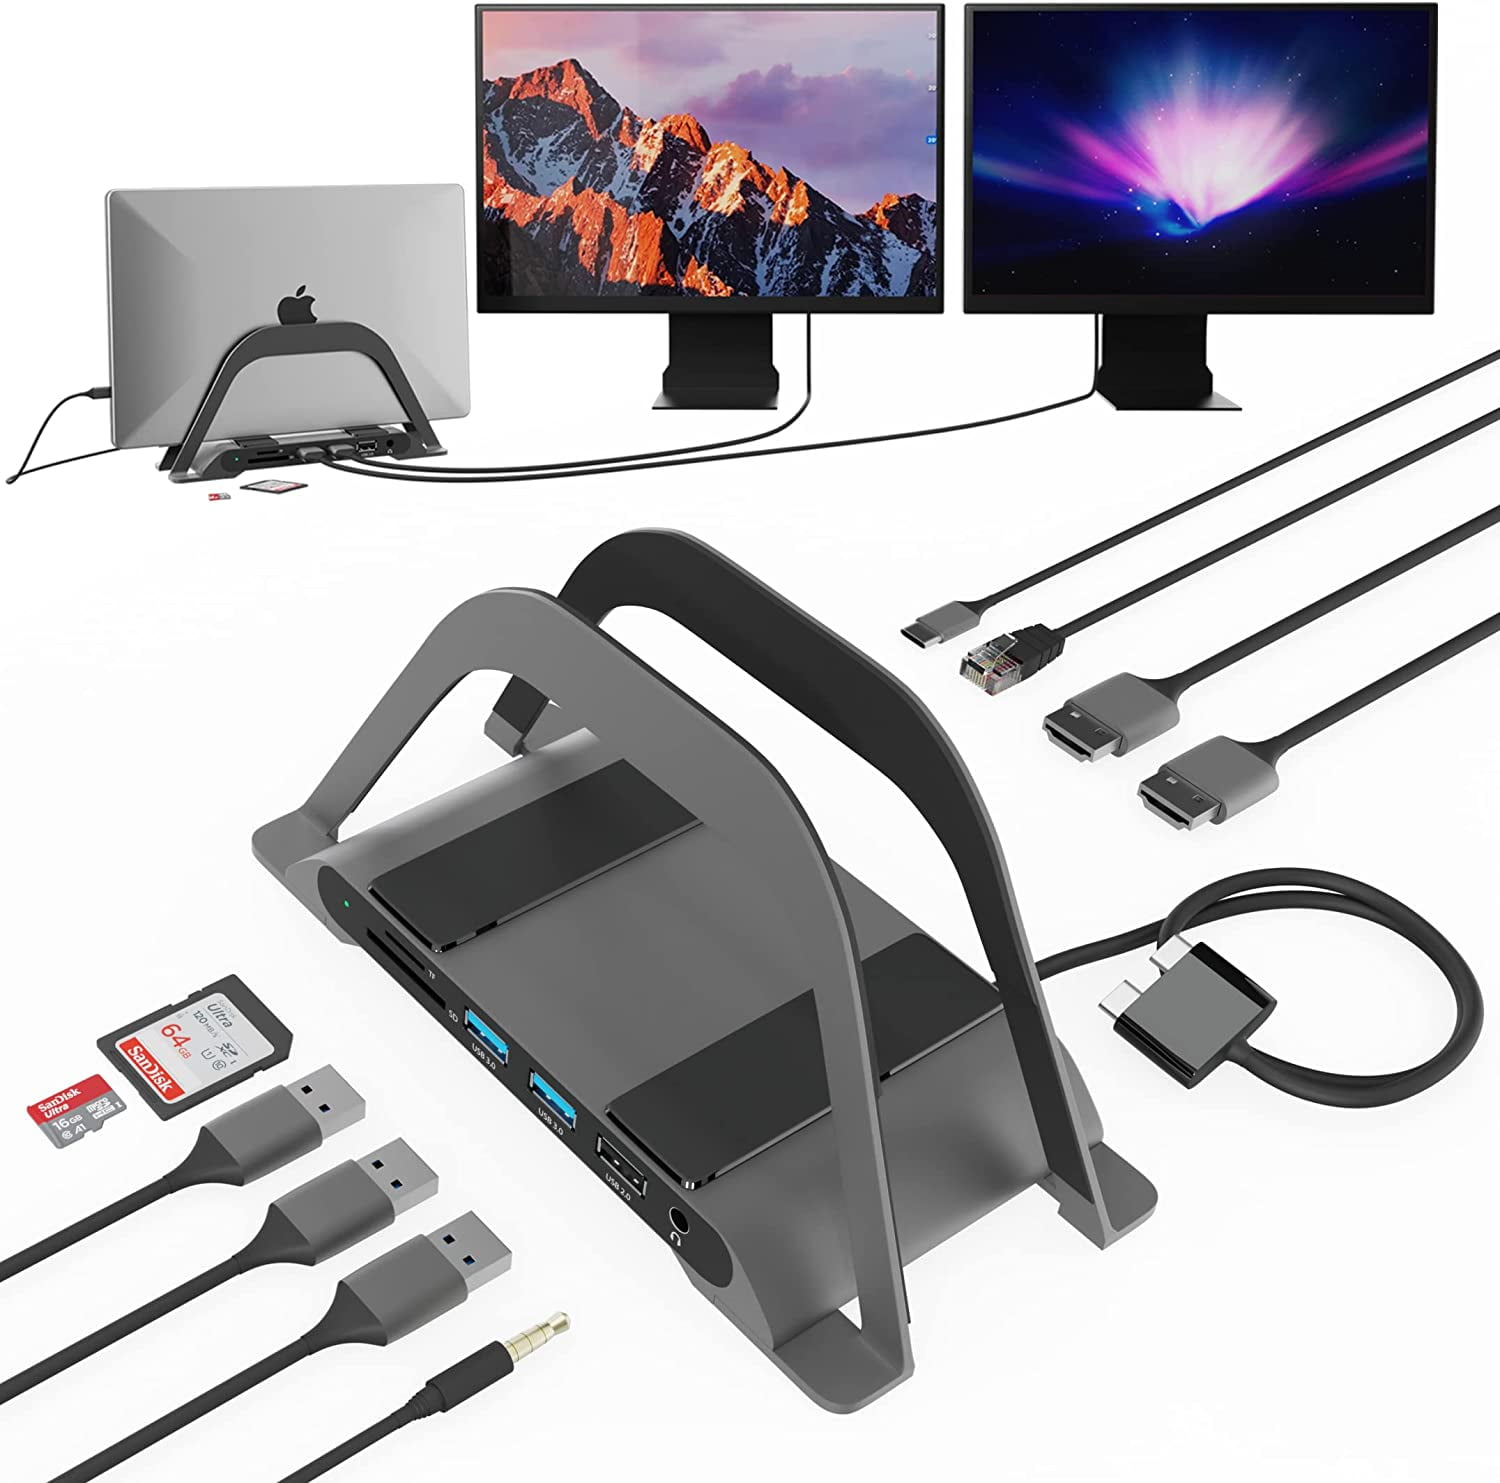 MacBook M1 Pro/M1 Max USB-C Docking Station - Dual Monitor Laptop Dock with Dual HDMI for 14-16 Inch Pro/Air, MacBook Dock with USB-C Power Delivery and USB Ports - Walmart.com